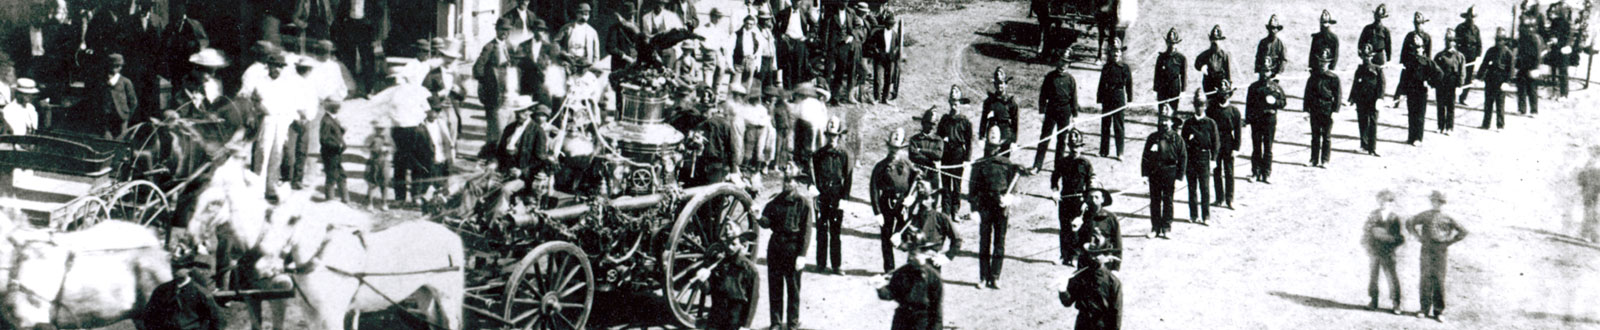 A historic photograph of the LAFD with horse-drawn vehicles